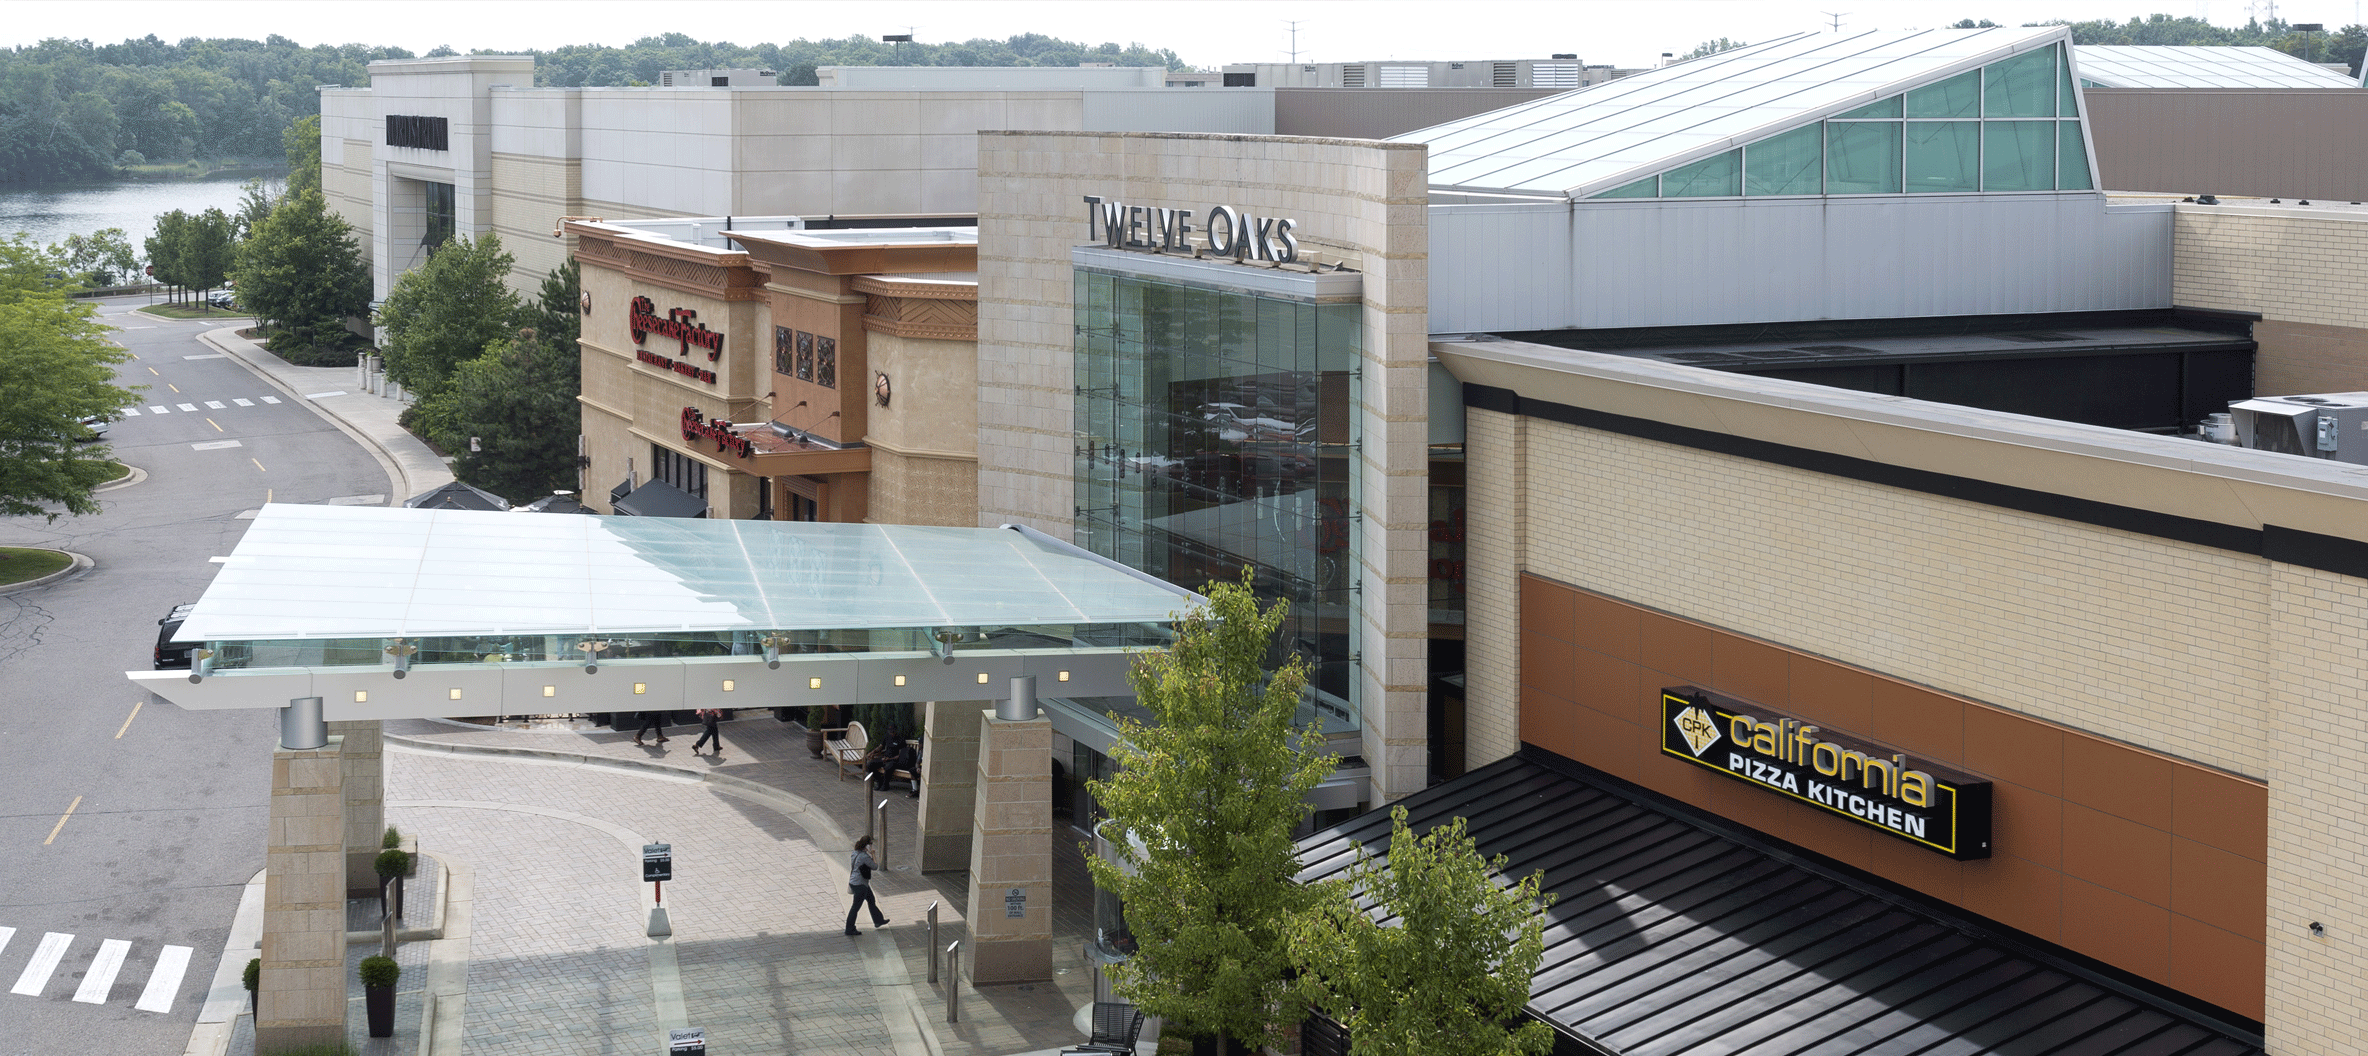 Find everything you're looking for at these metro Detroit malls